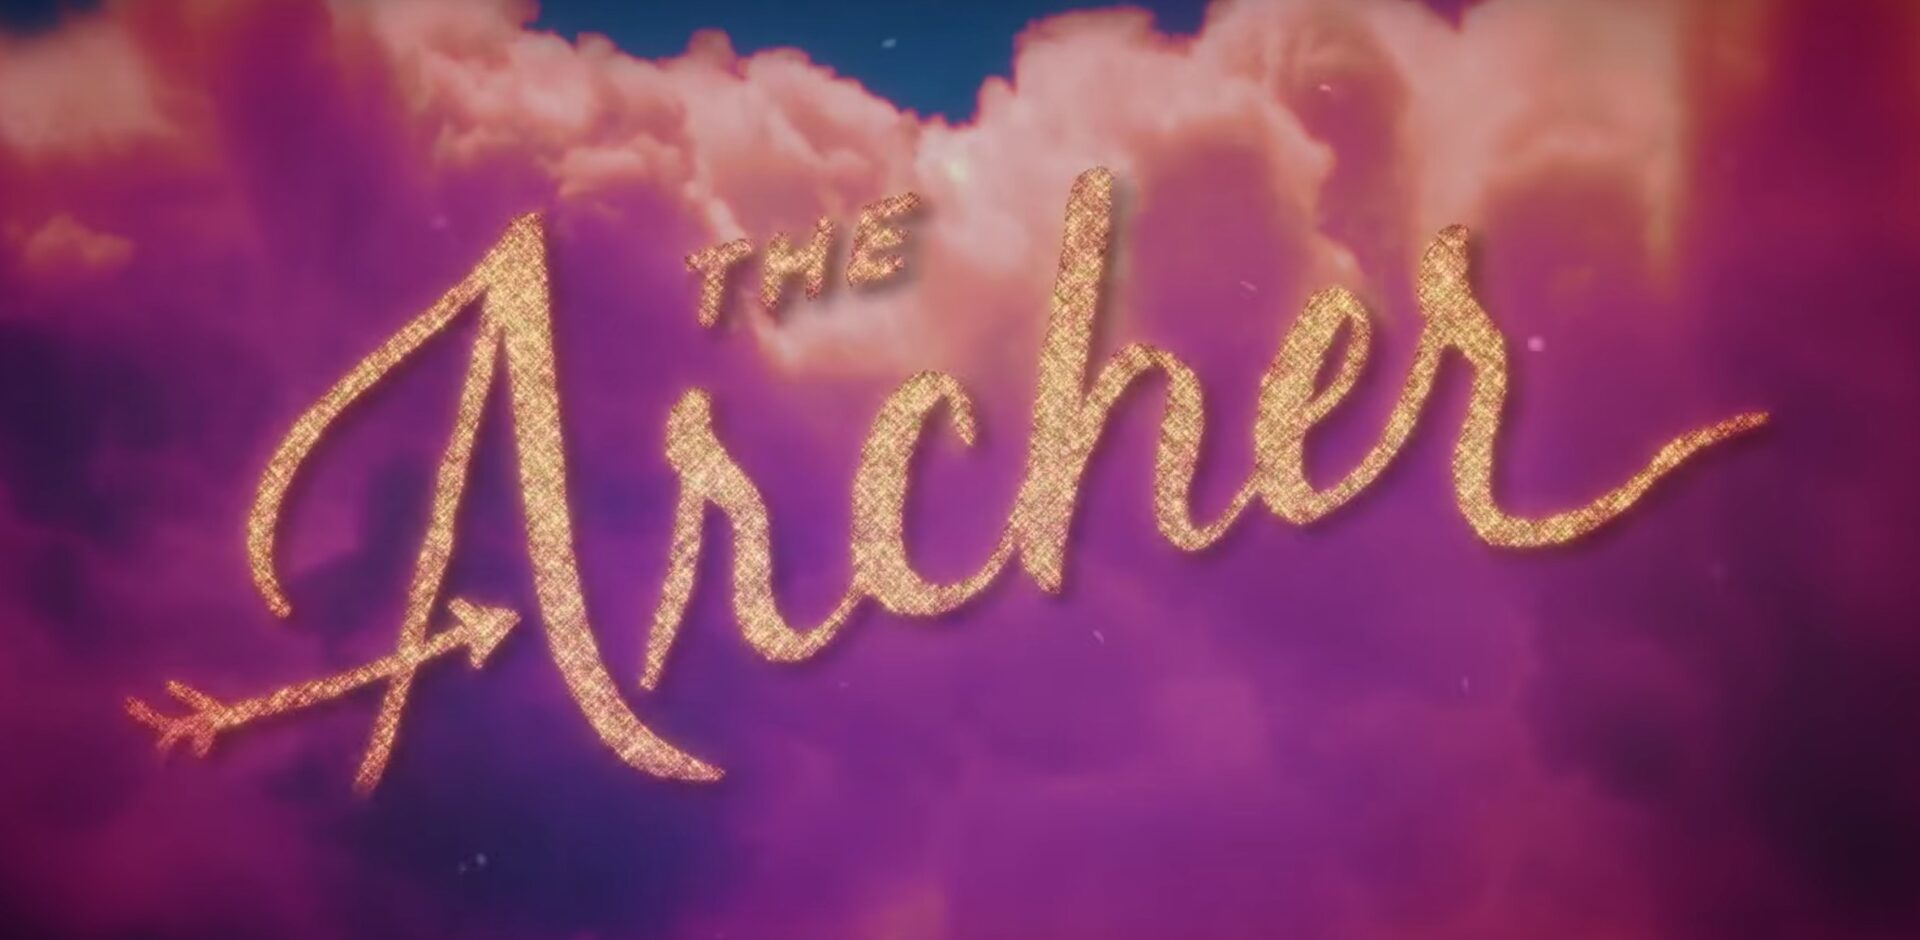 Taylor Swift shares emotional new track “The Archer”